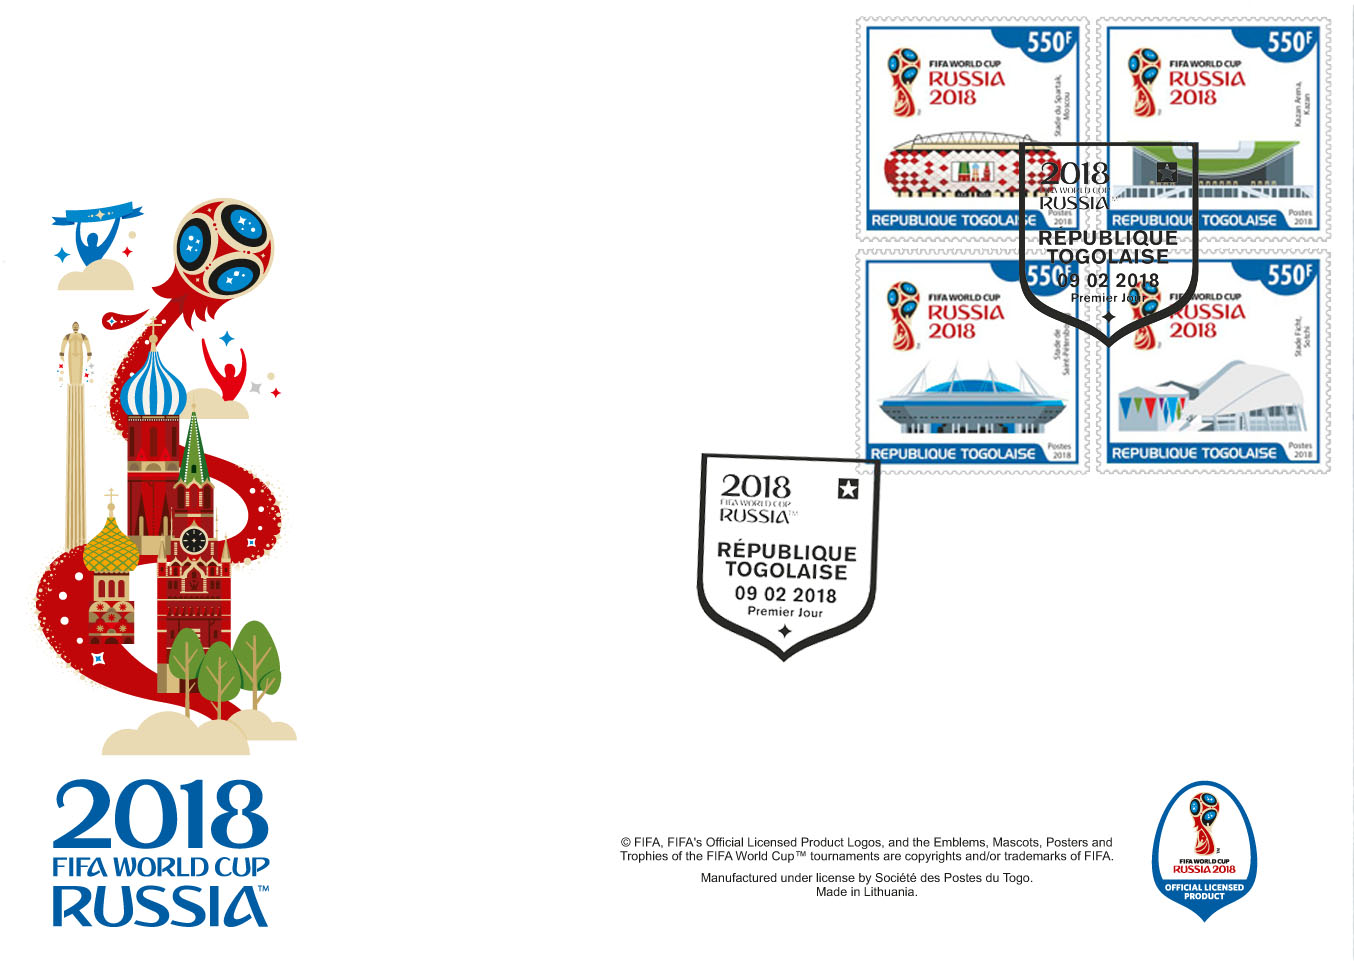 FIFA World Cup Russia 2018 - Issue of Togo postage stamps